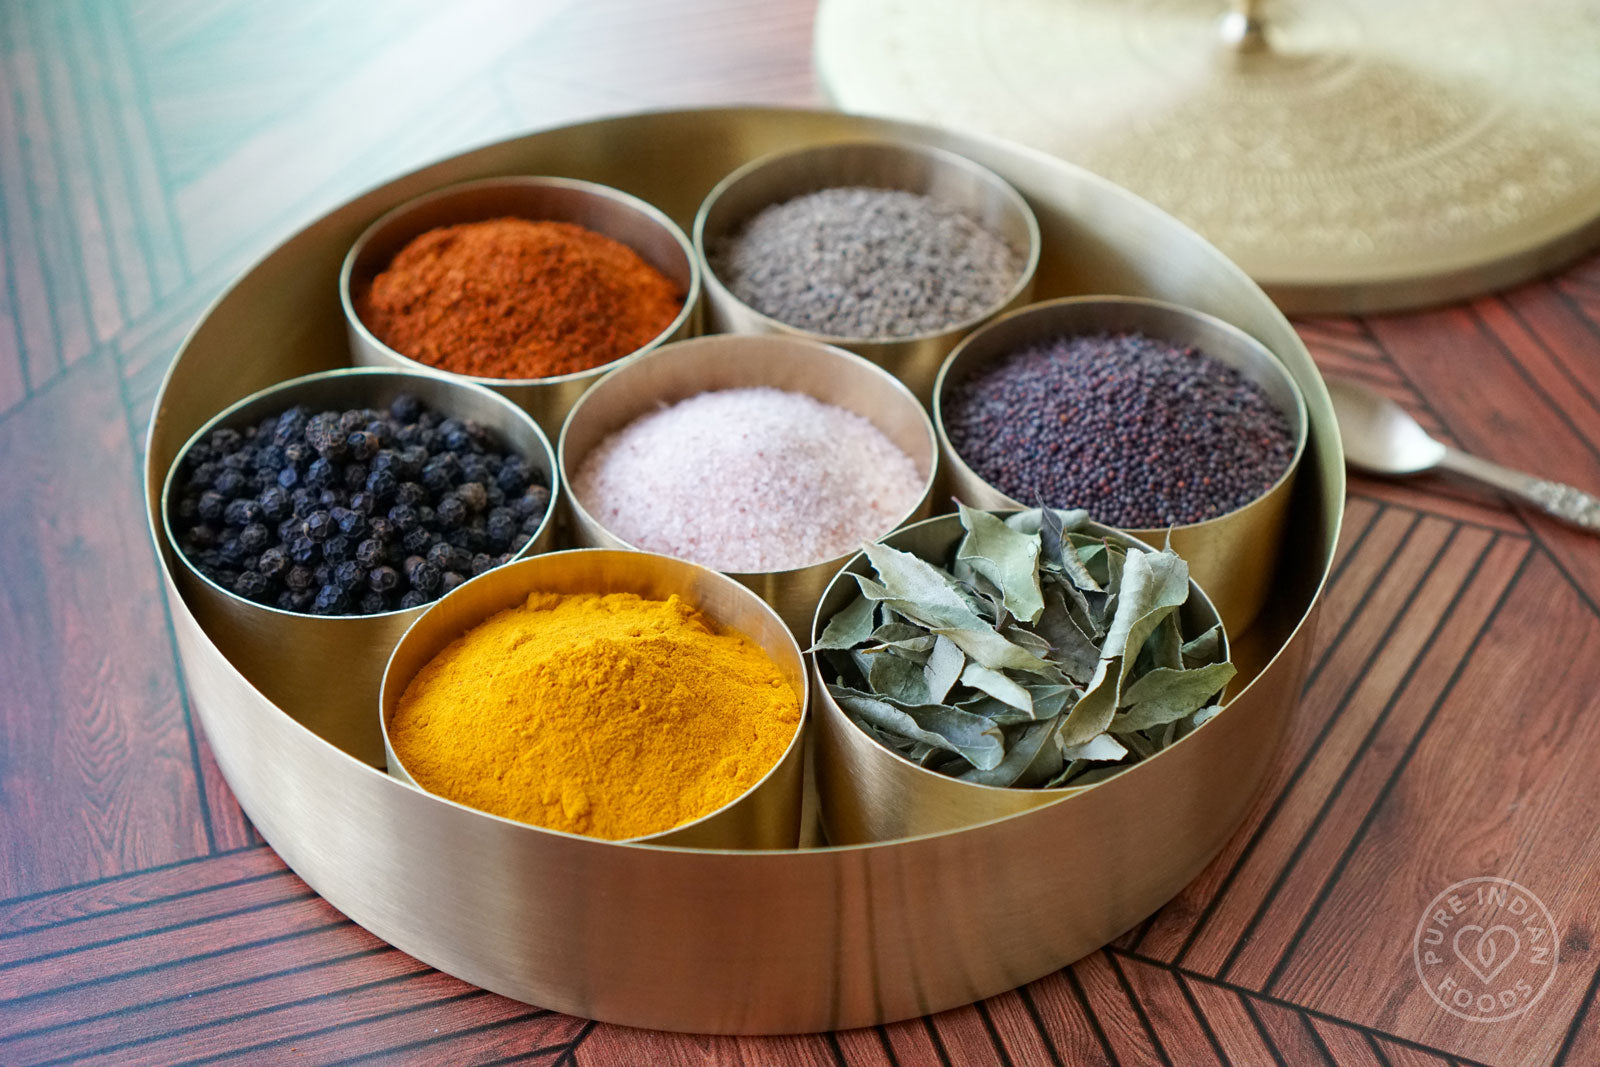 Open Indian Spice Box, showing the beautiful organic spice set inside